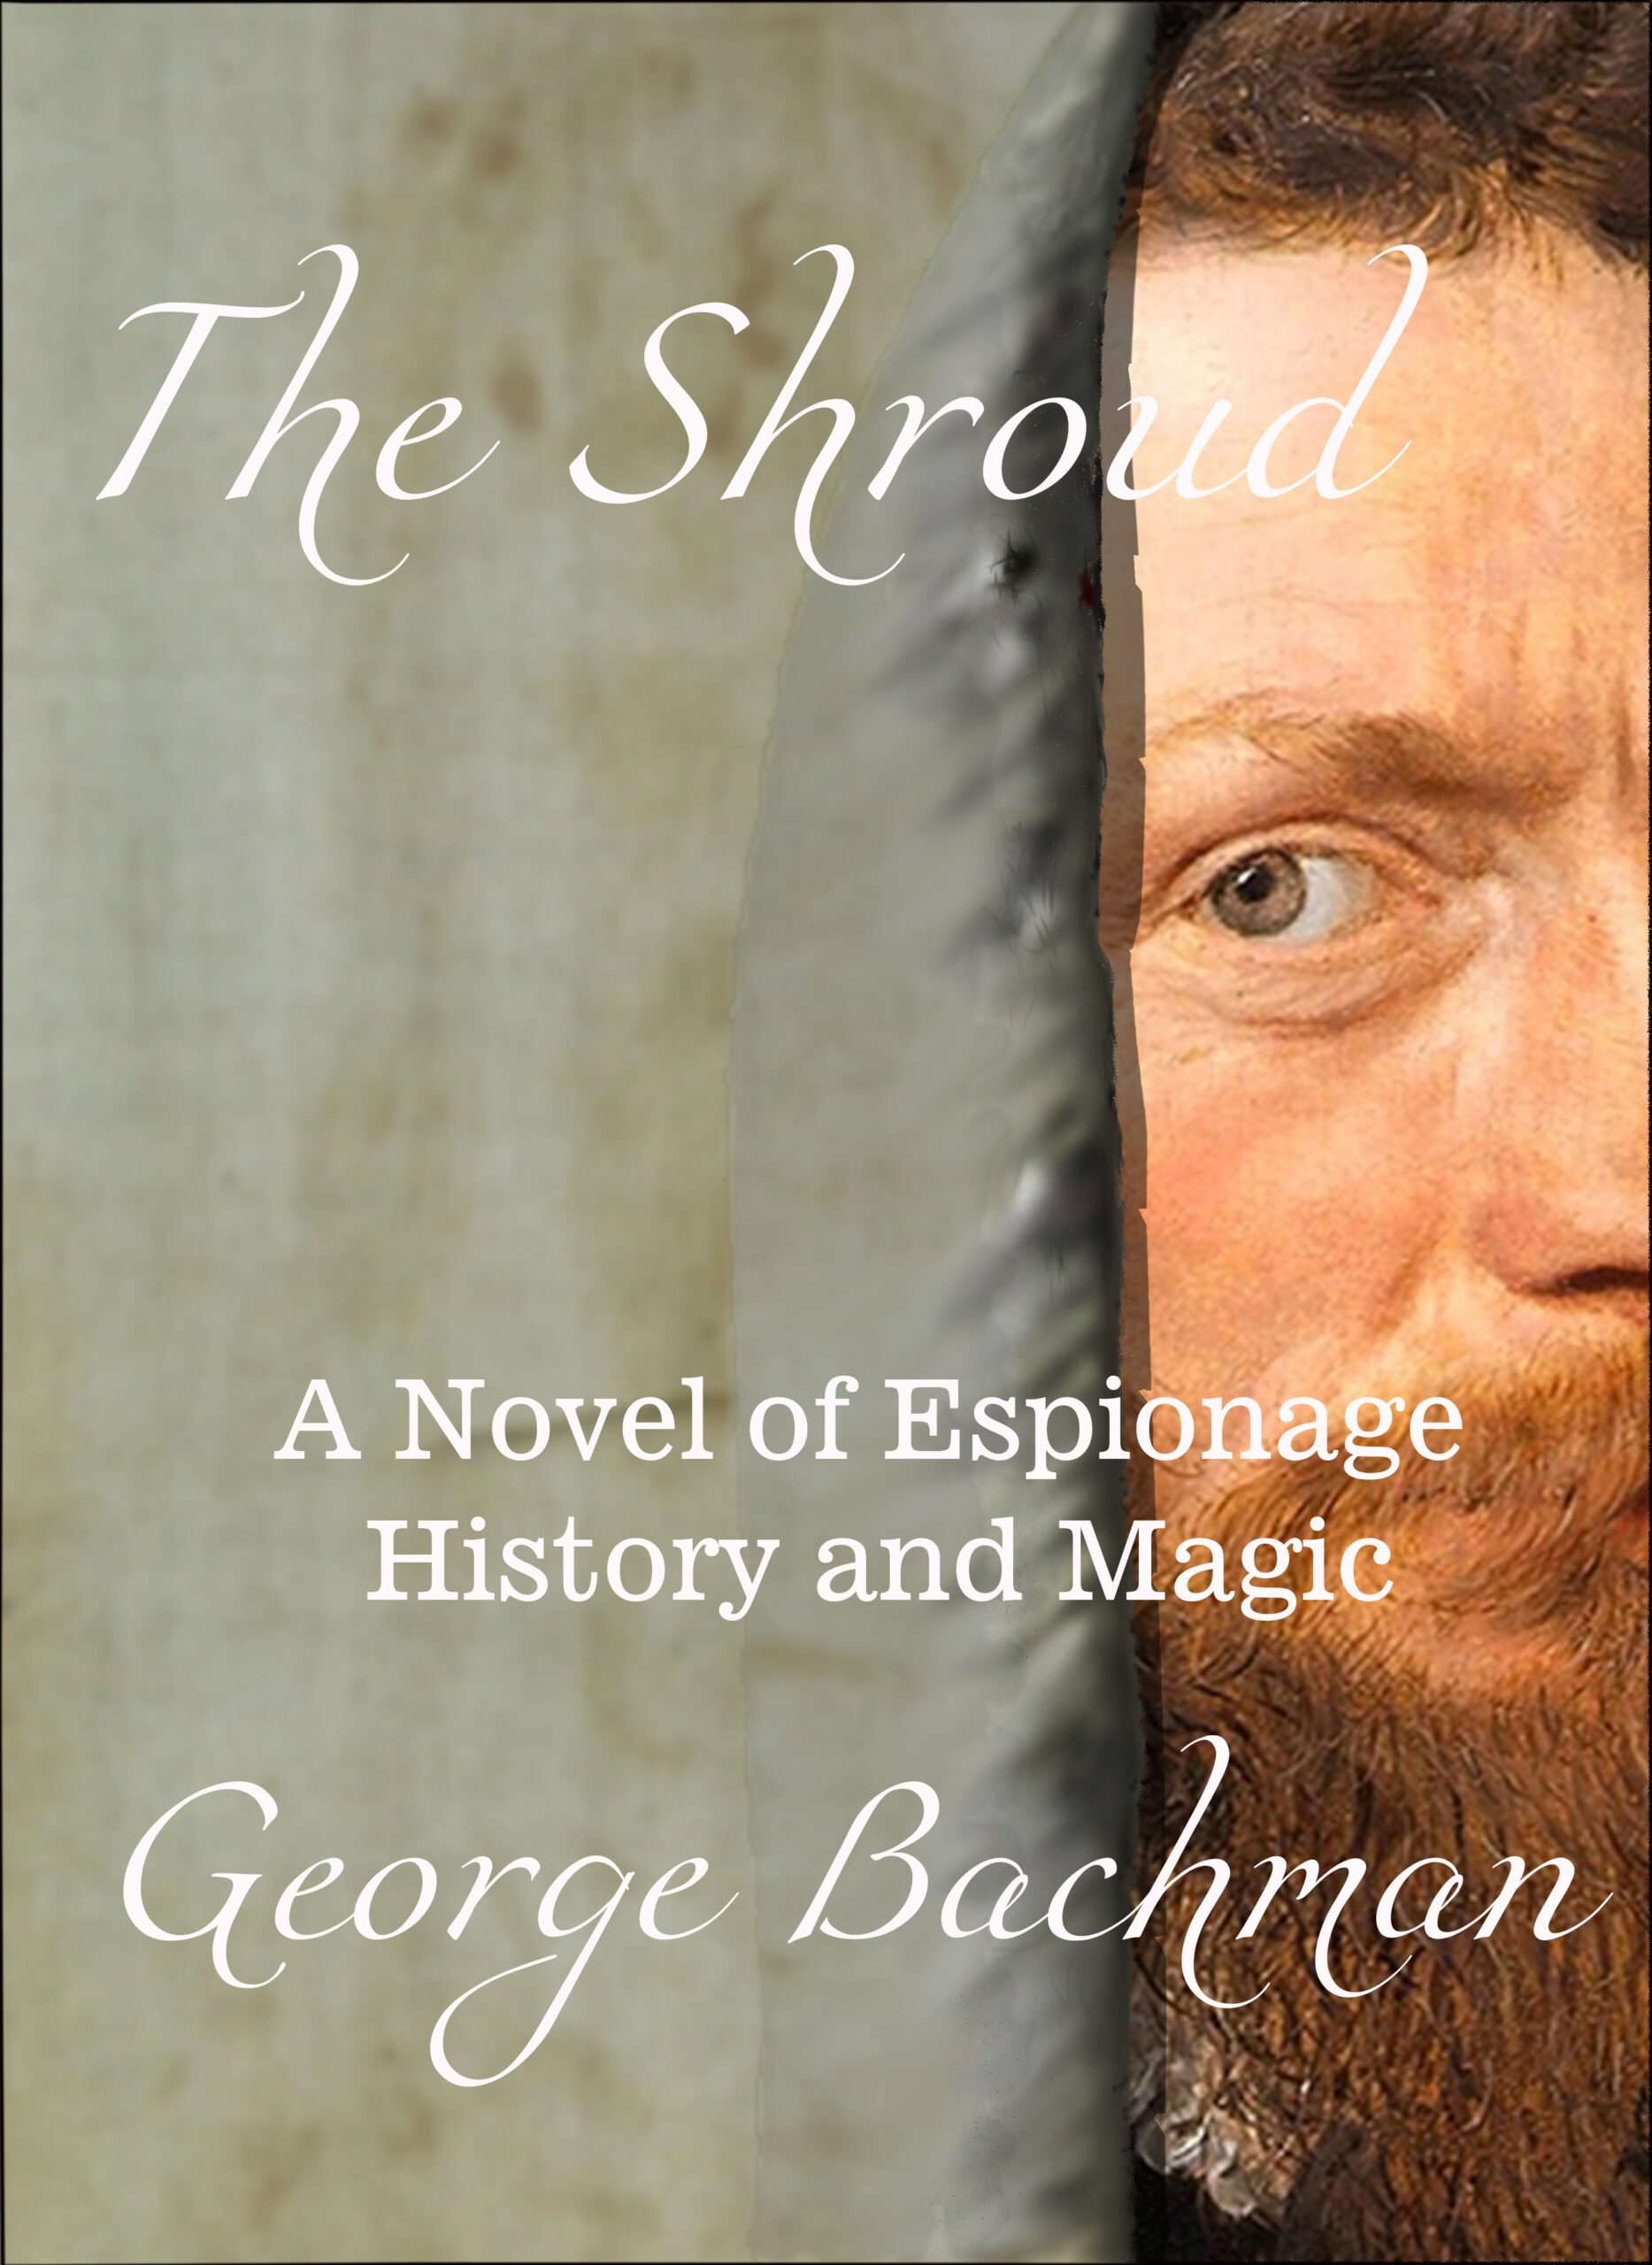 Book Review by WeLoveQualityBooks for the novel, The Shroud by George Bachman